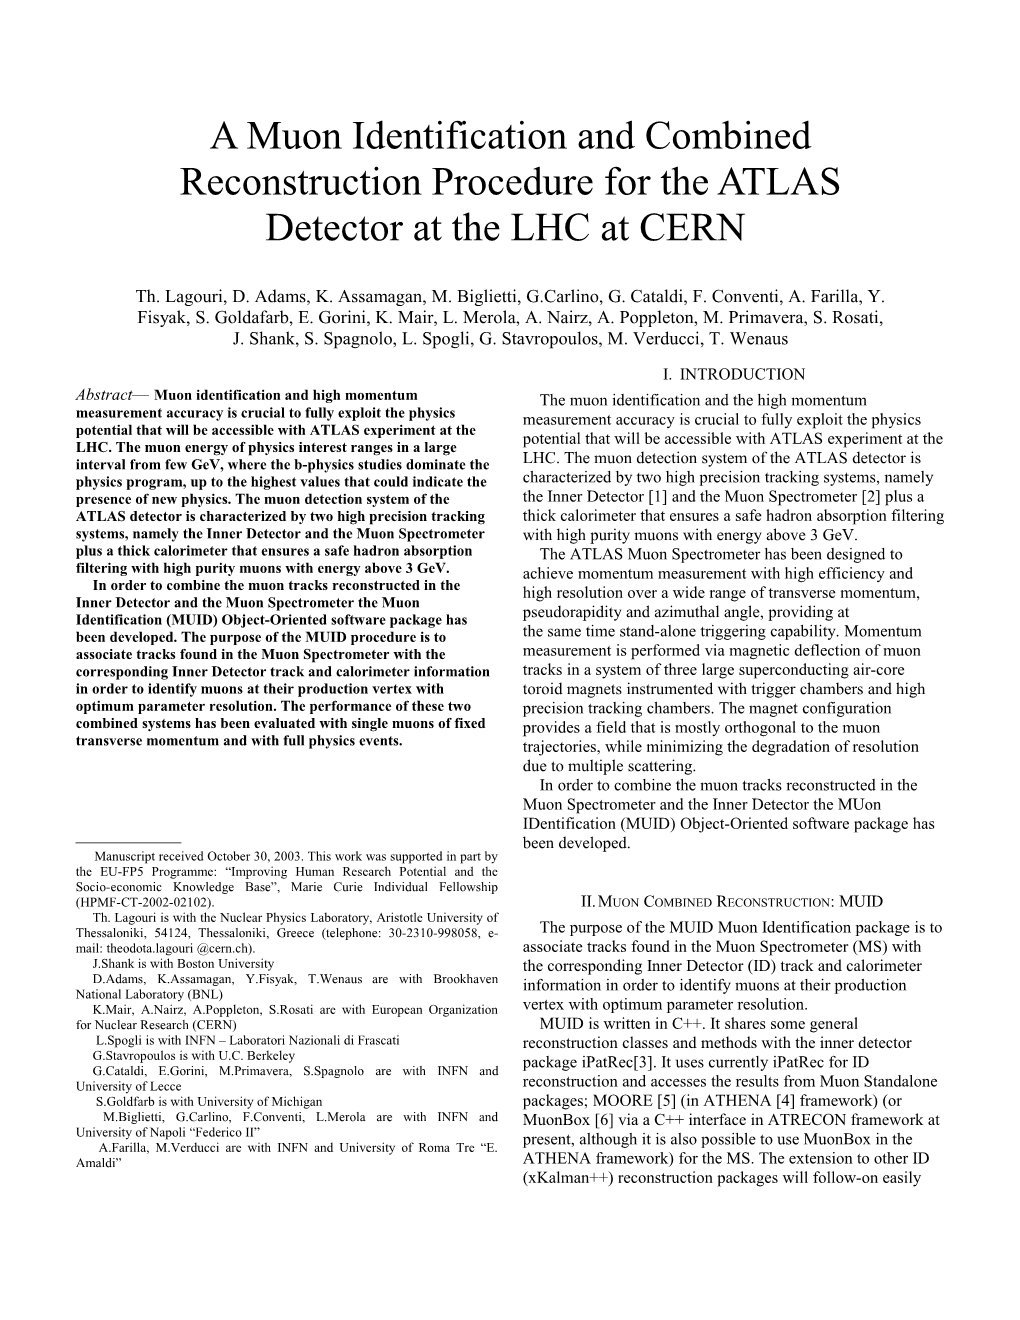 A Muon Identification and Combined Reconstruction Procedure for the ATLAS Detector at The